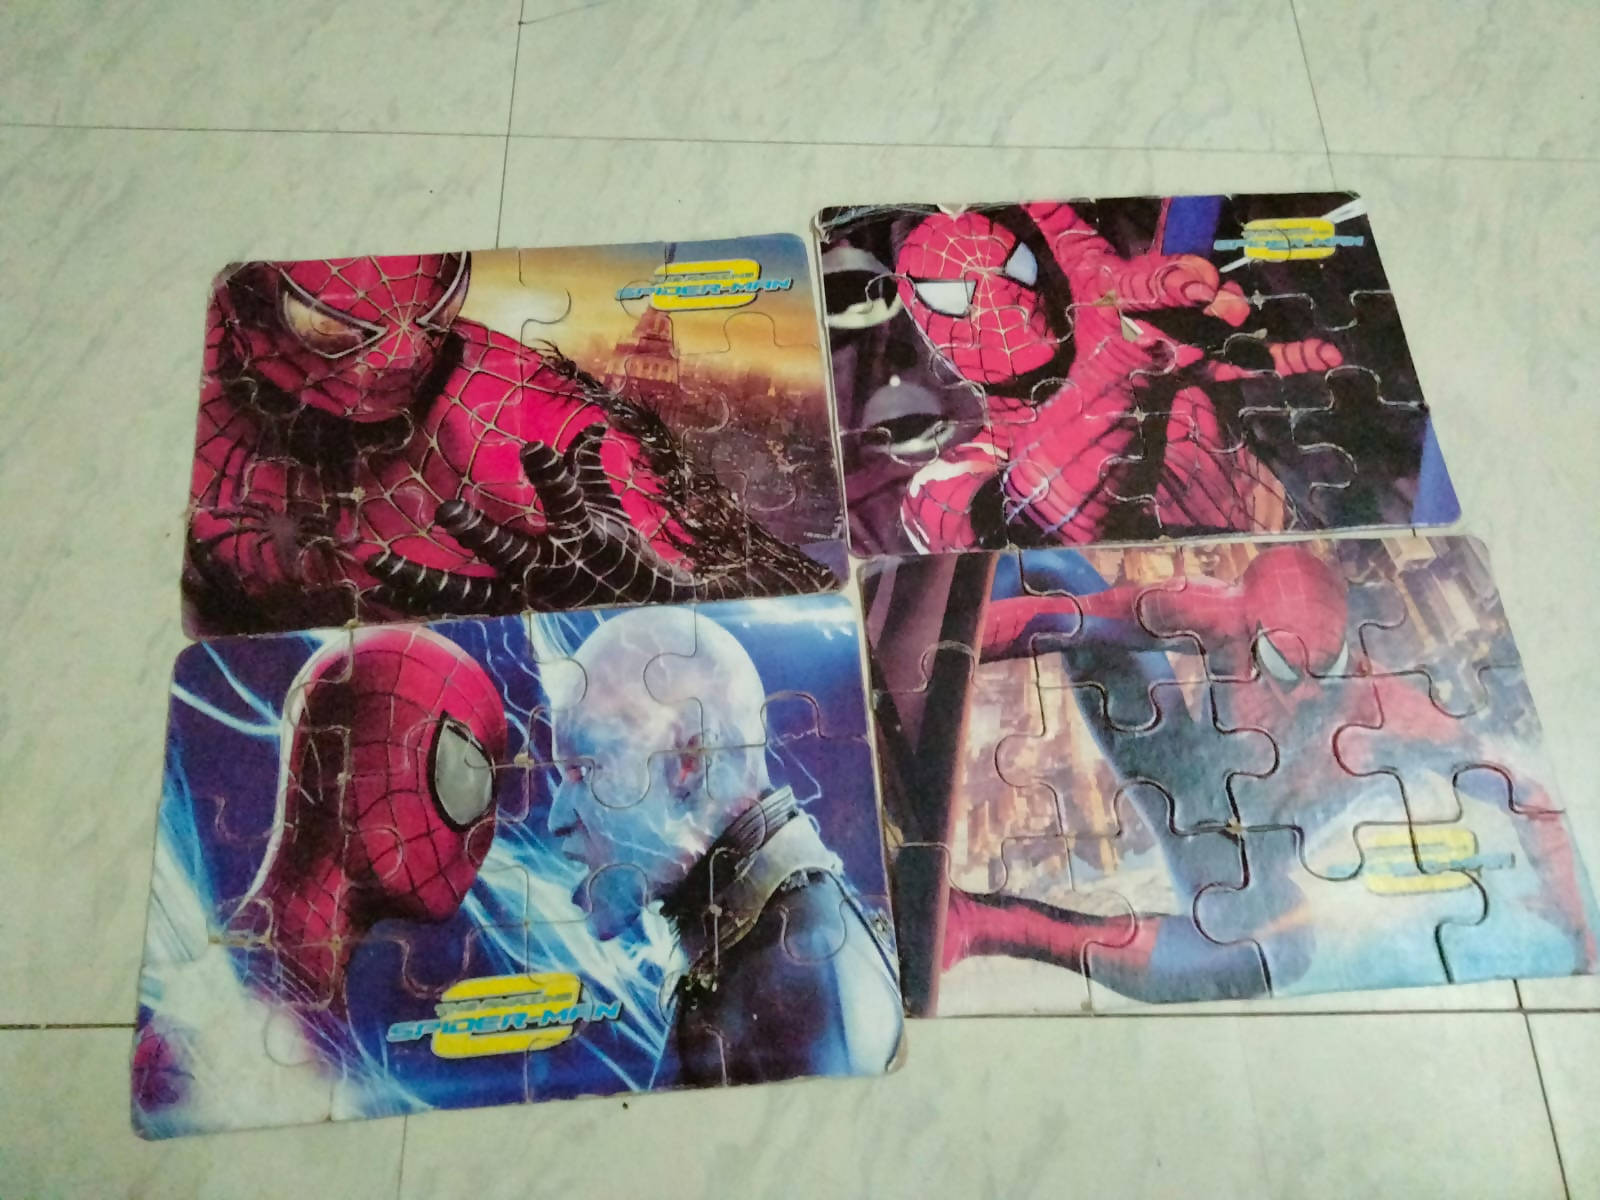 Spider-Man 108 Piece Jigsaw Puzzle for Kids - Set of 4